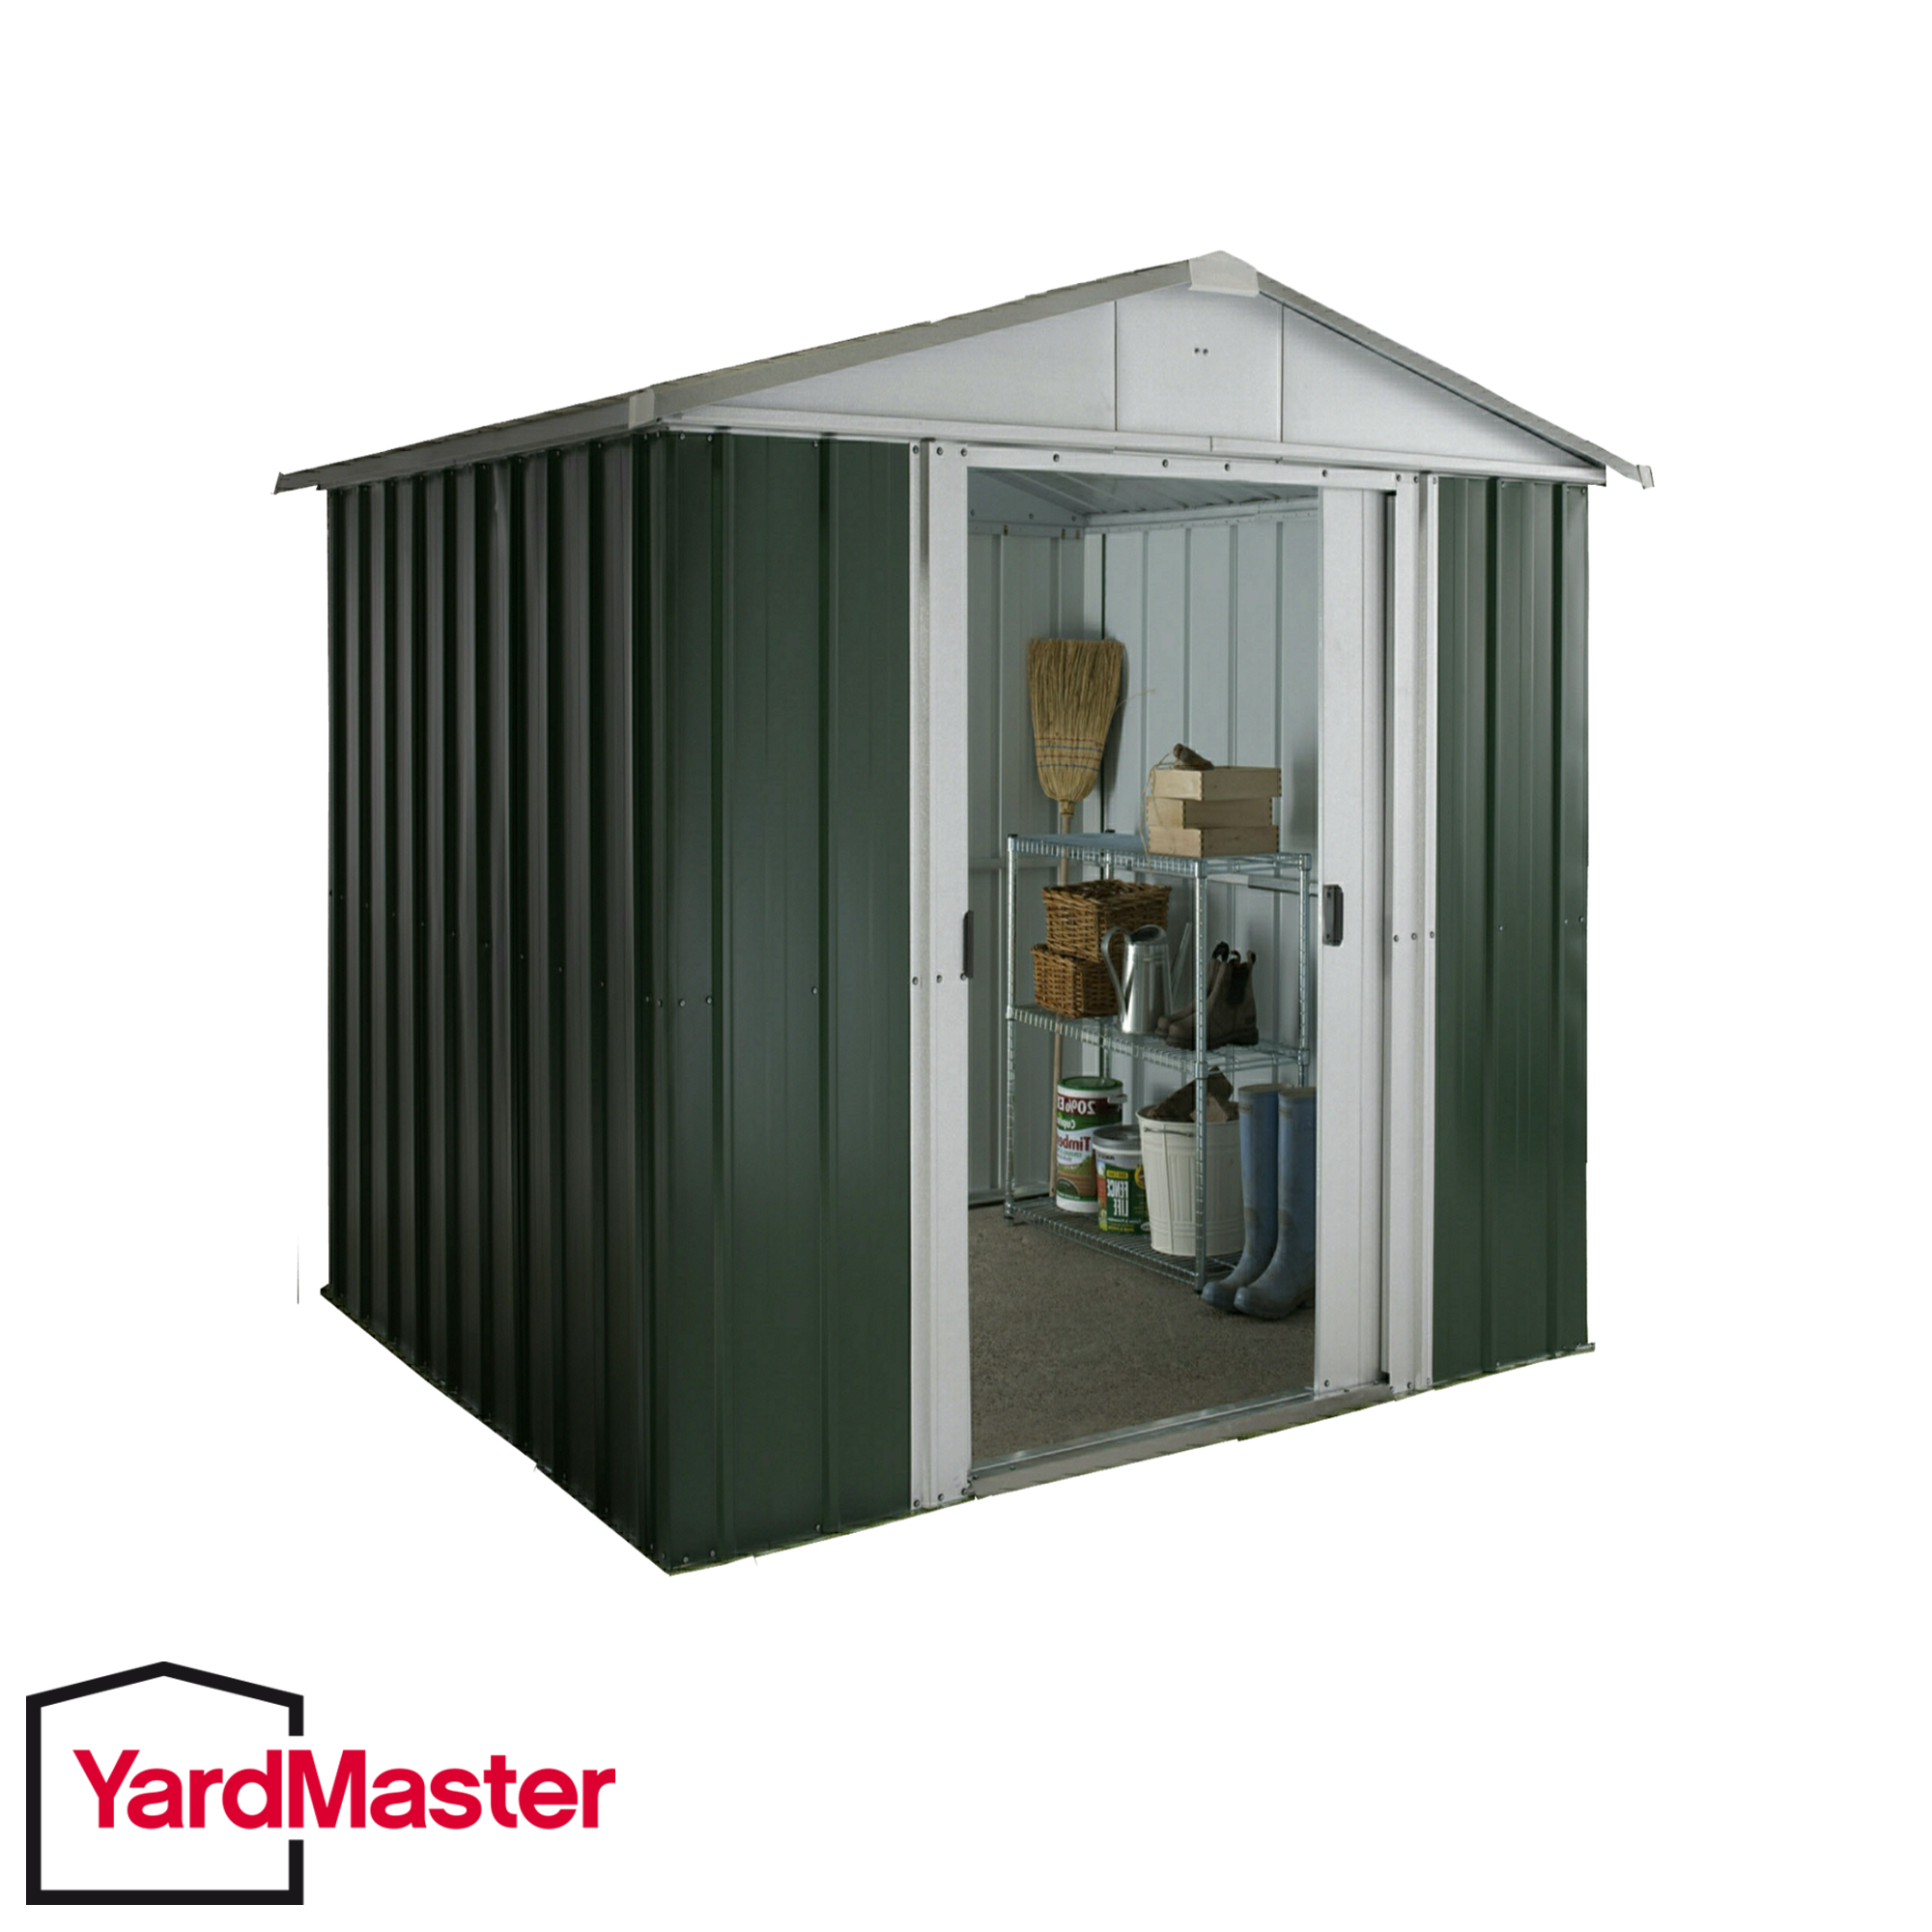 Featured image for “YardMaster 6x7 Emerald Deluxe Apex (GEYZ) Metal Shed”